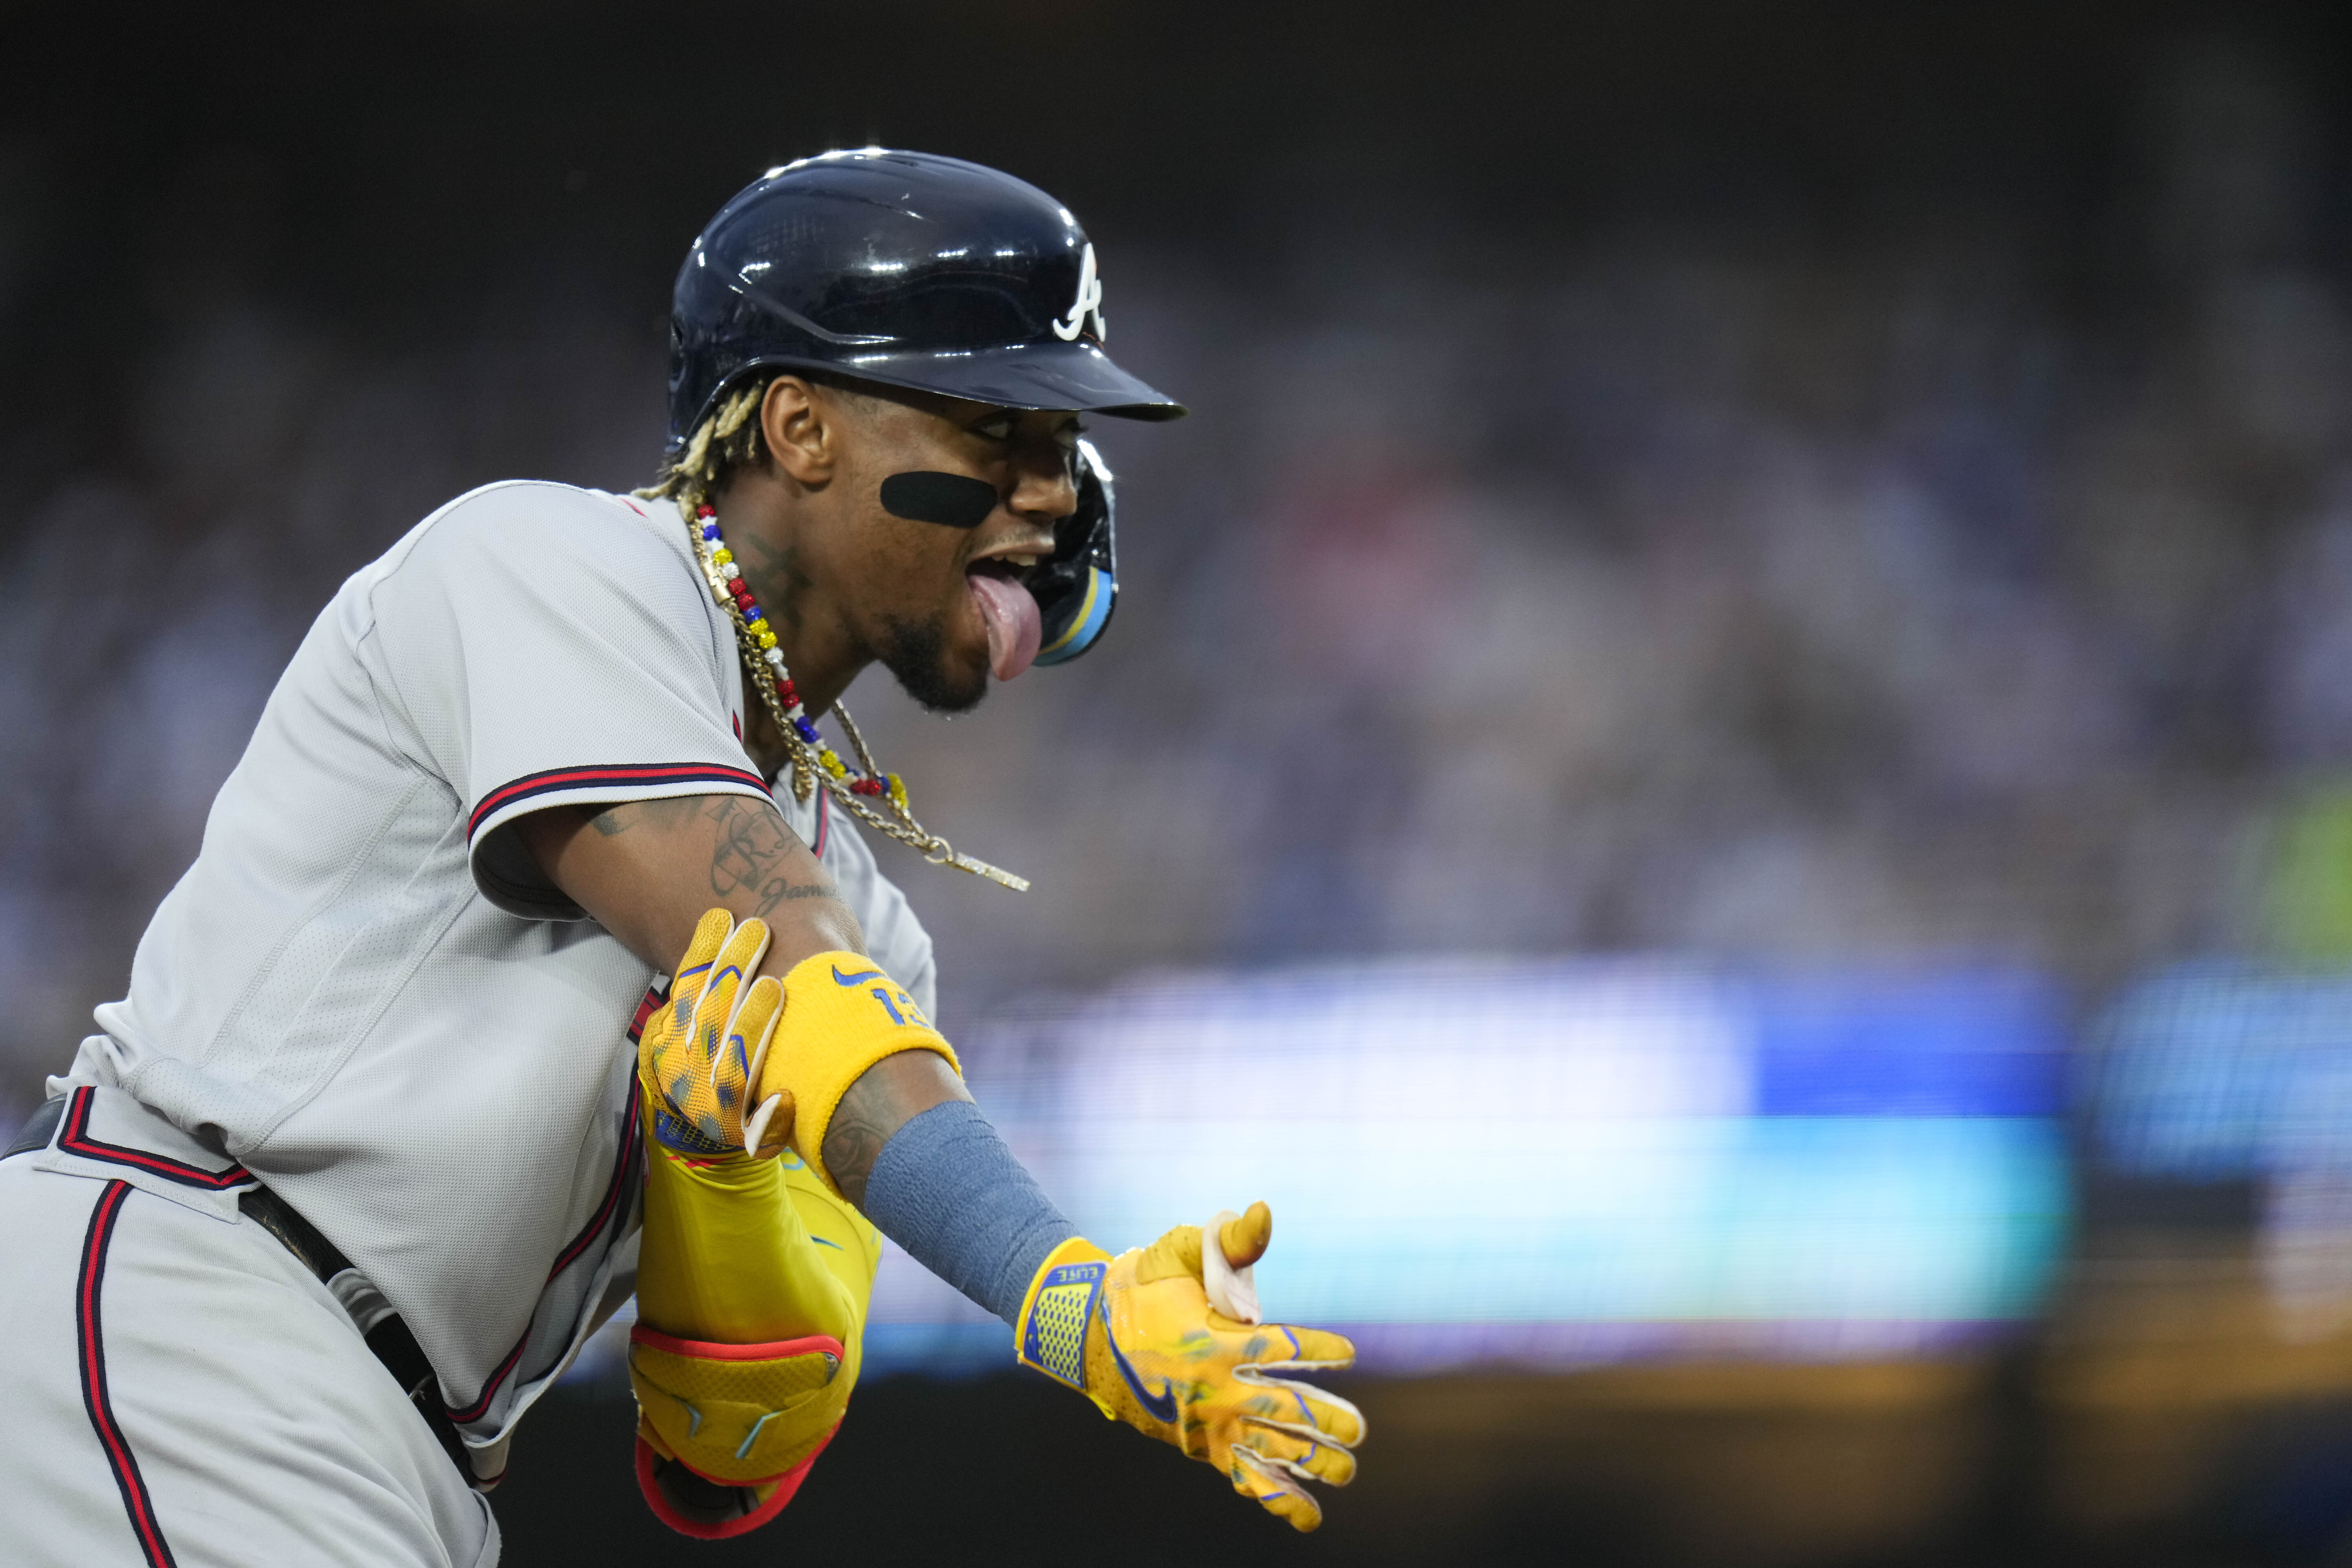 Acuña homers in 3rd straight game against Dodgers as Braves win 4